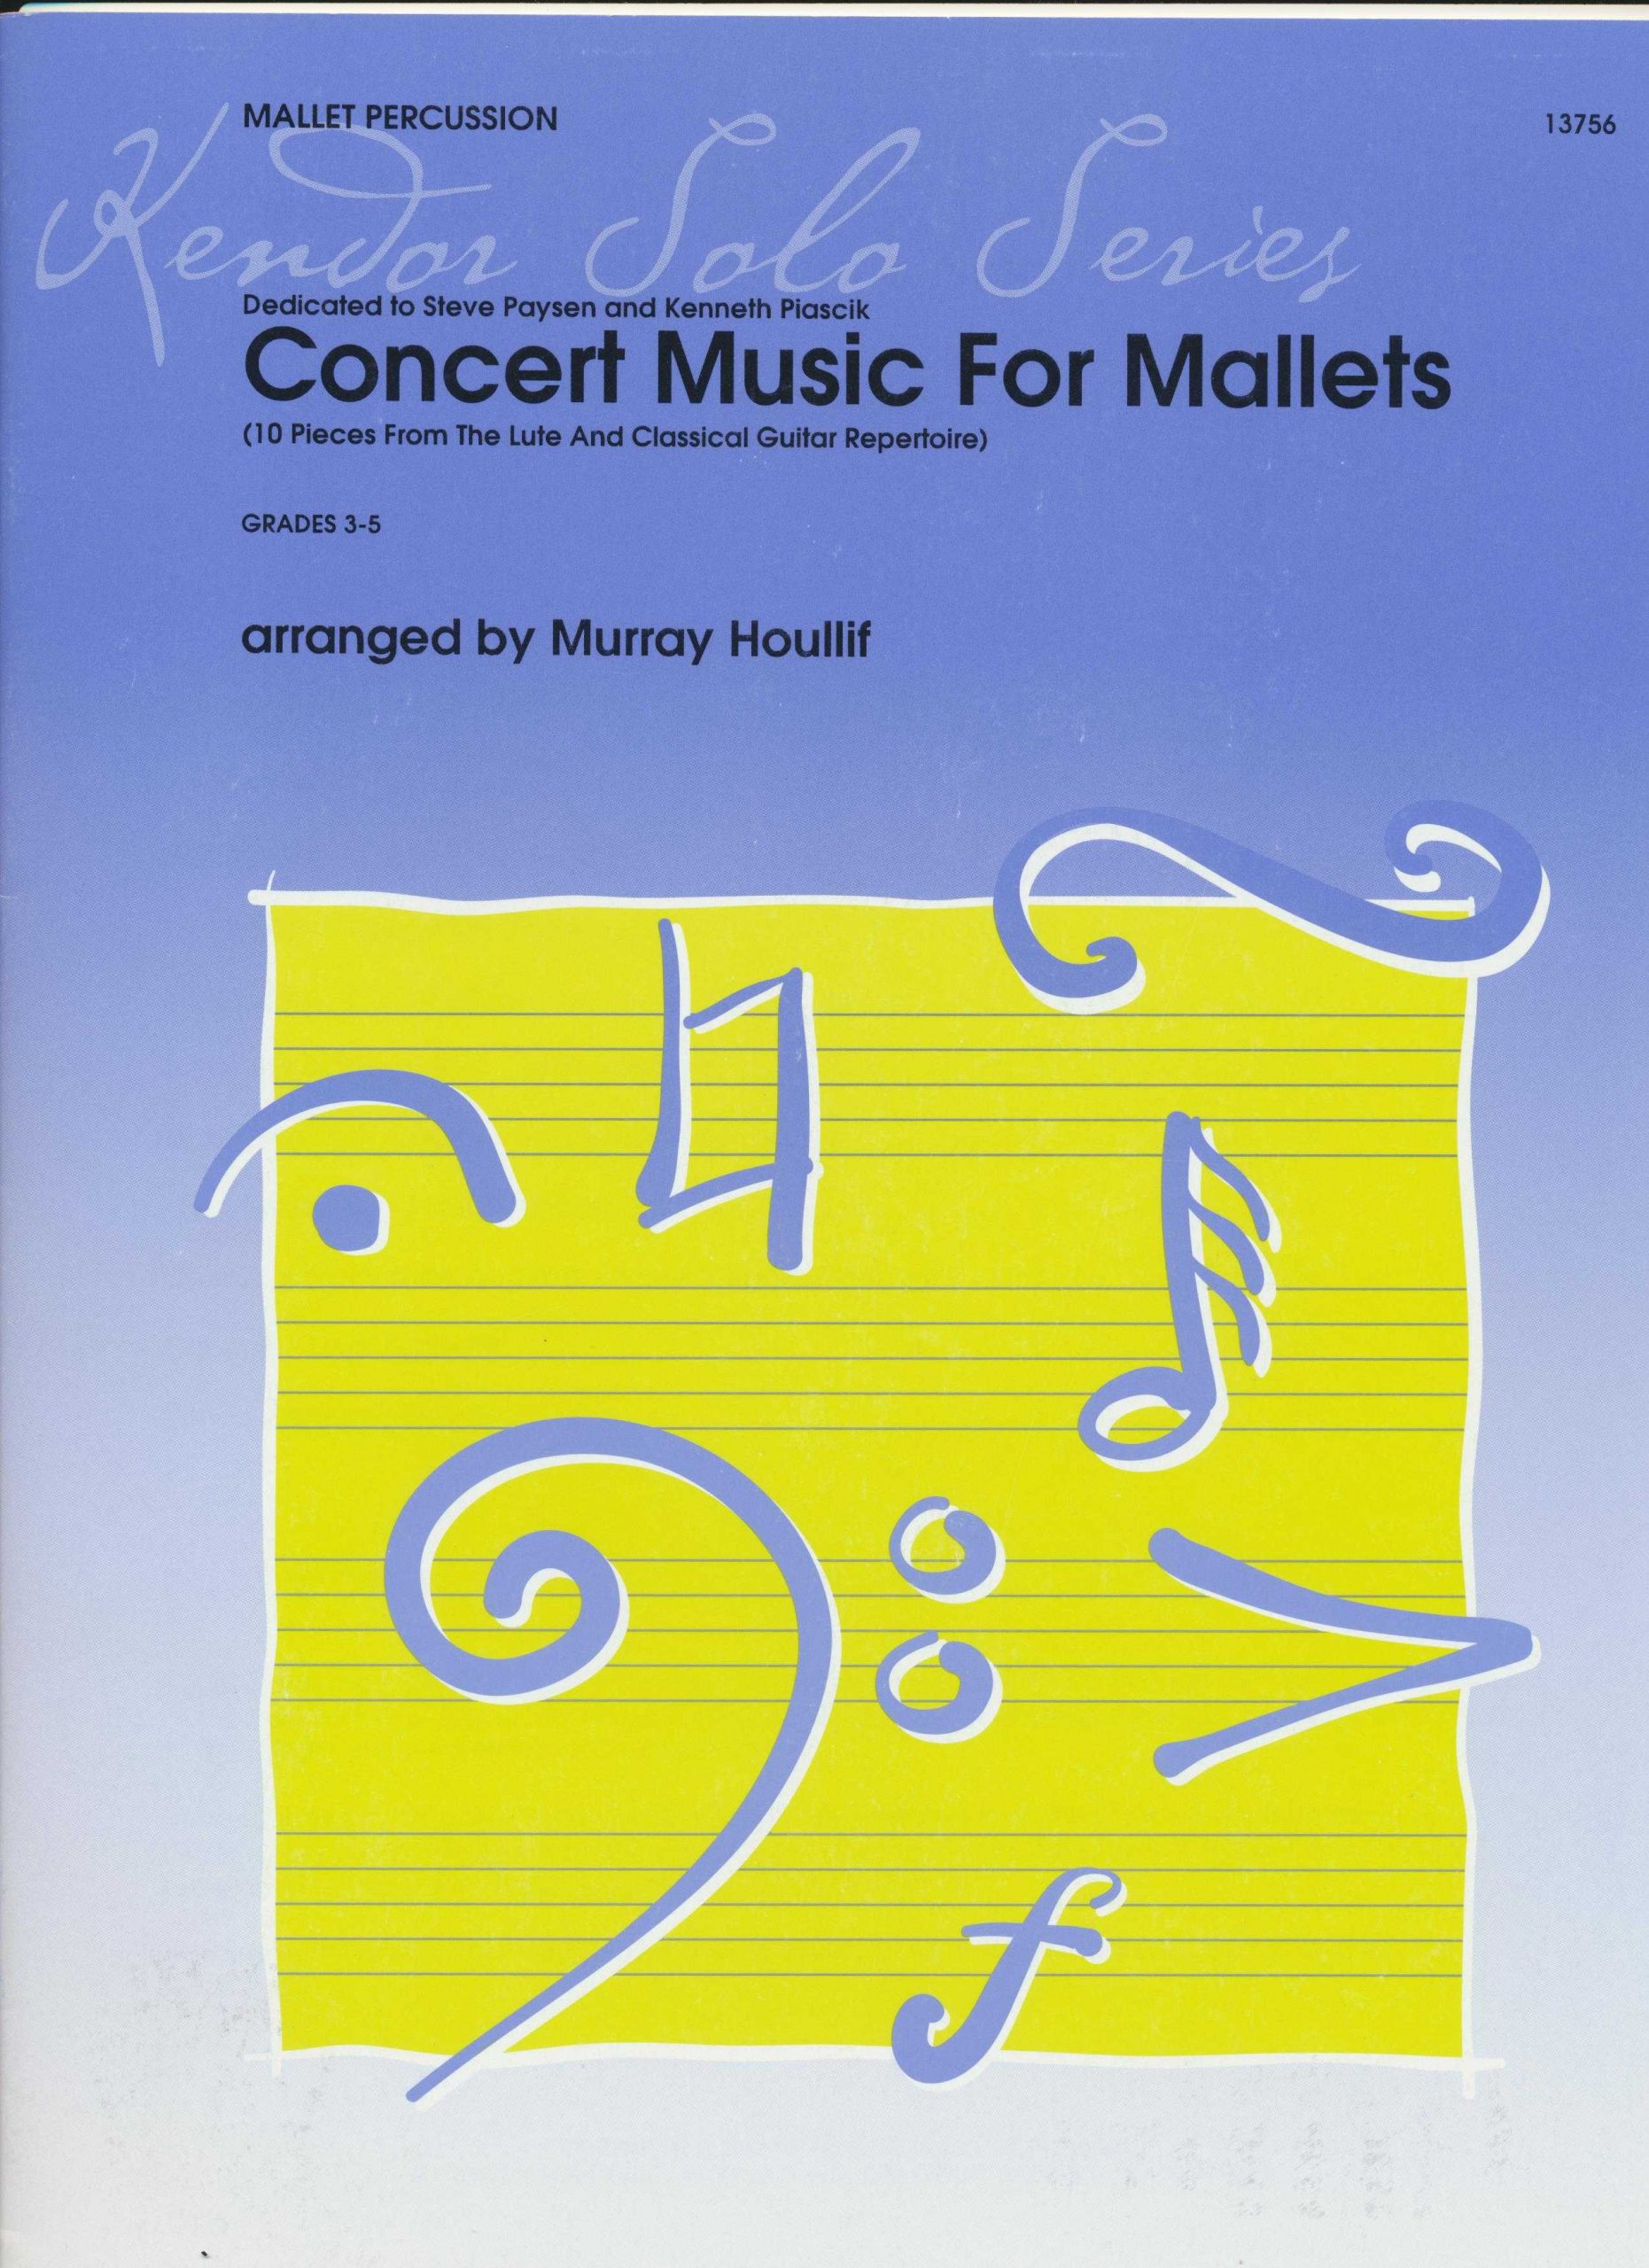 Concert Music for Mallets by Murray Houllif